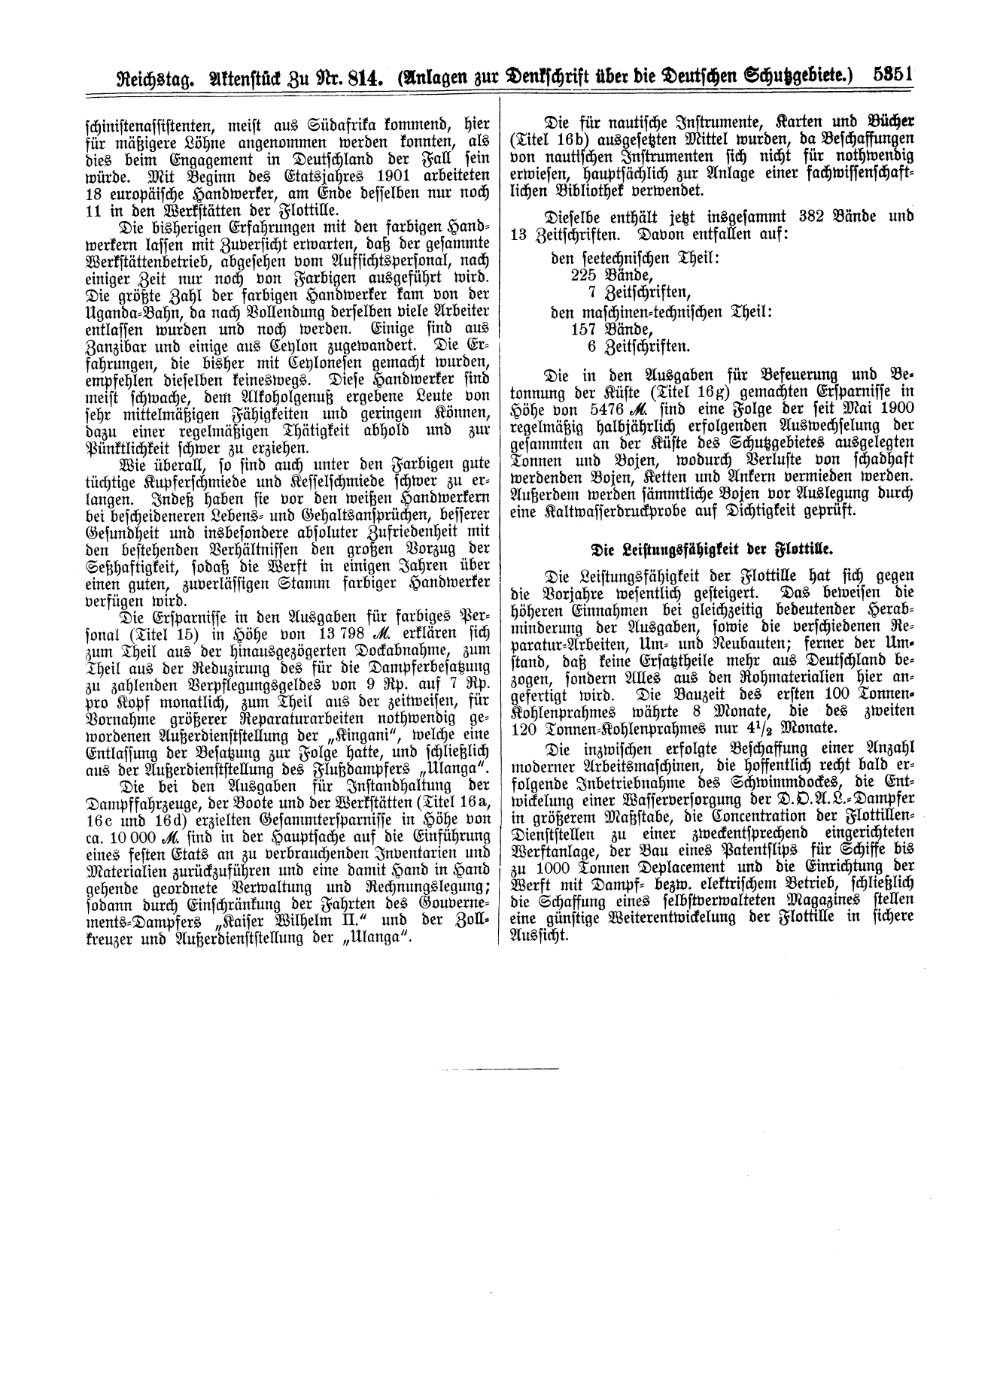 Scan of page 5351